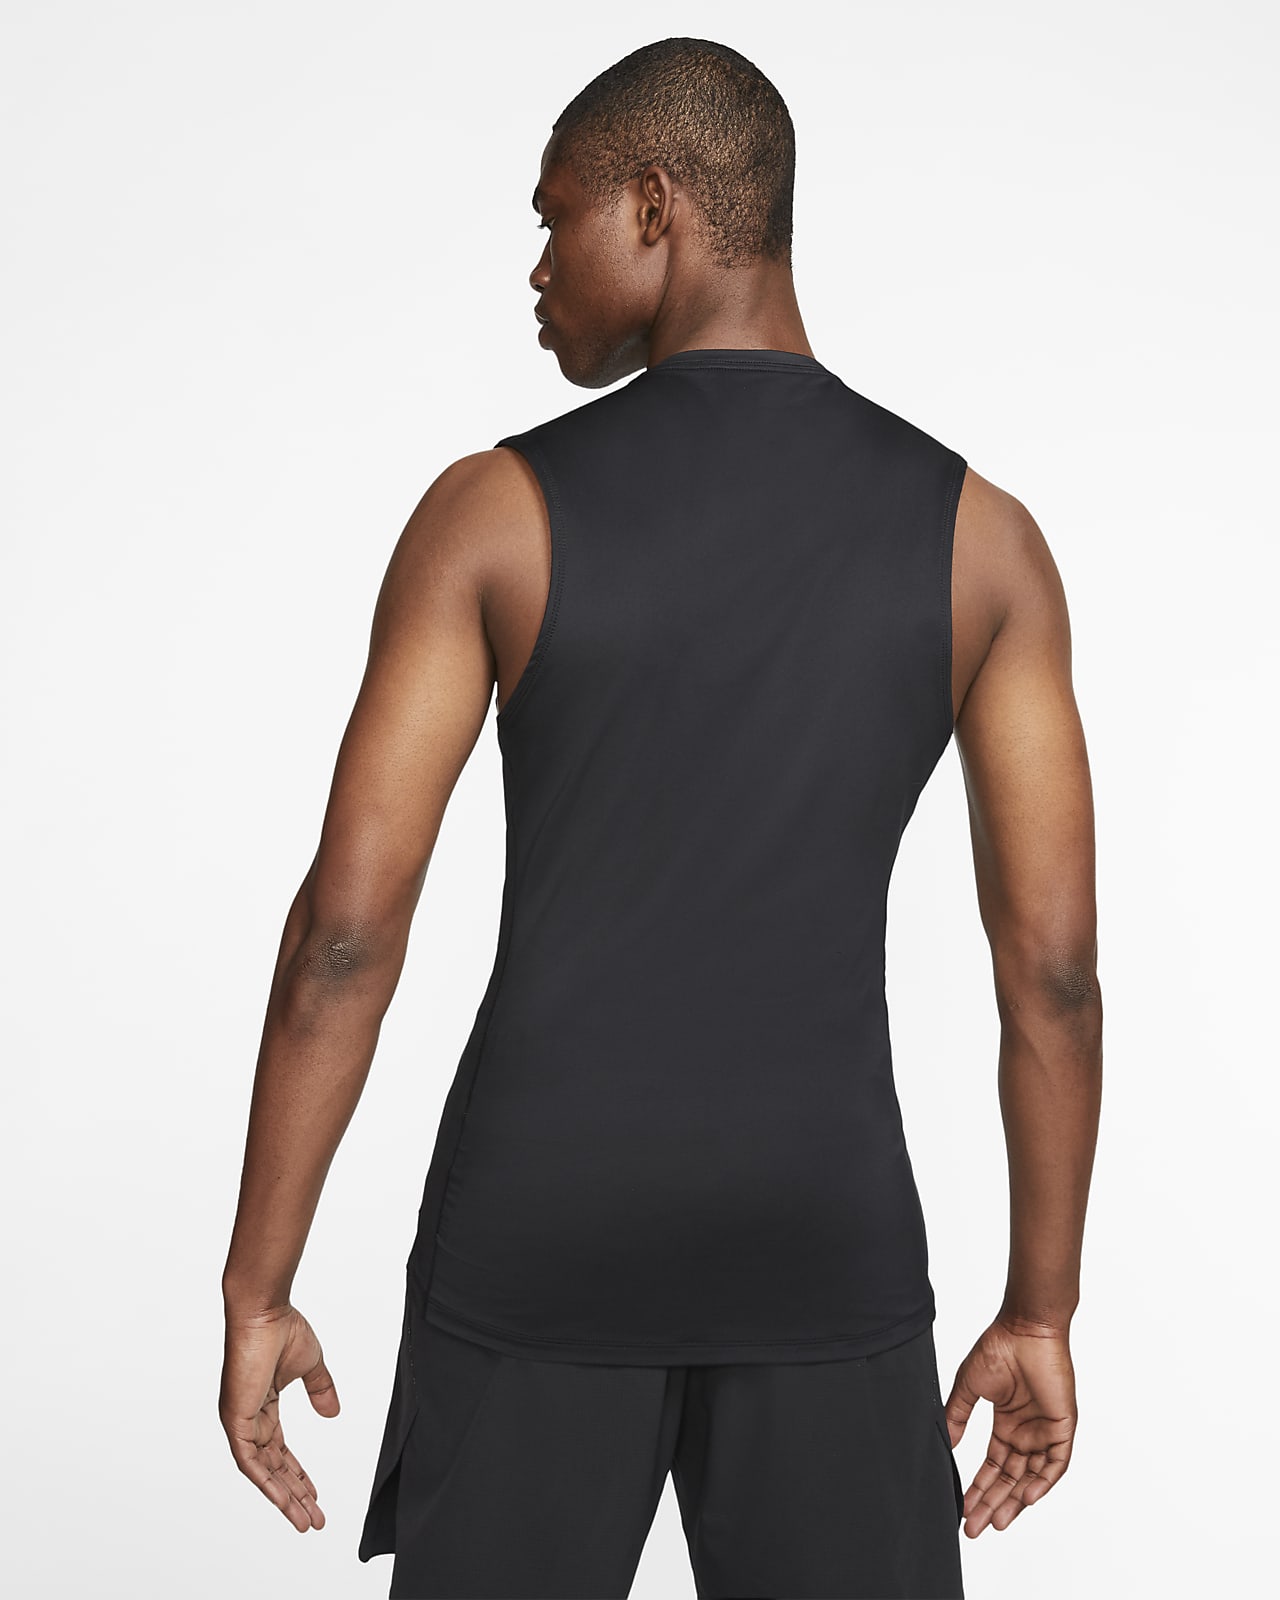 nike men's pro fitted compression tank top